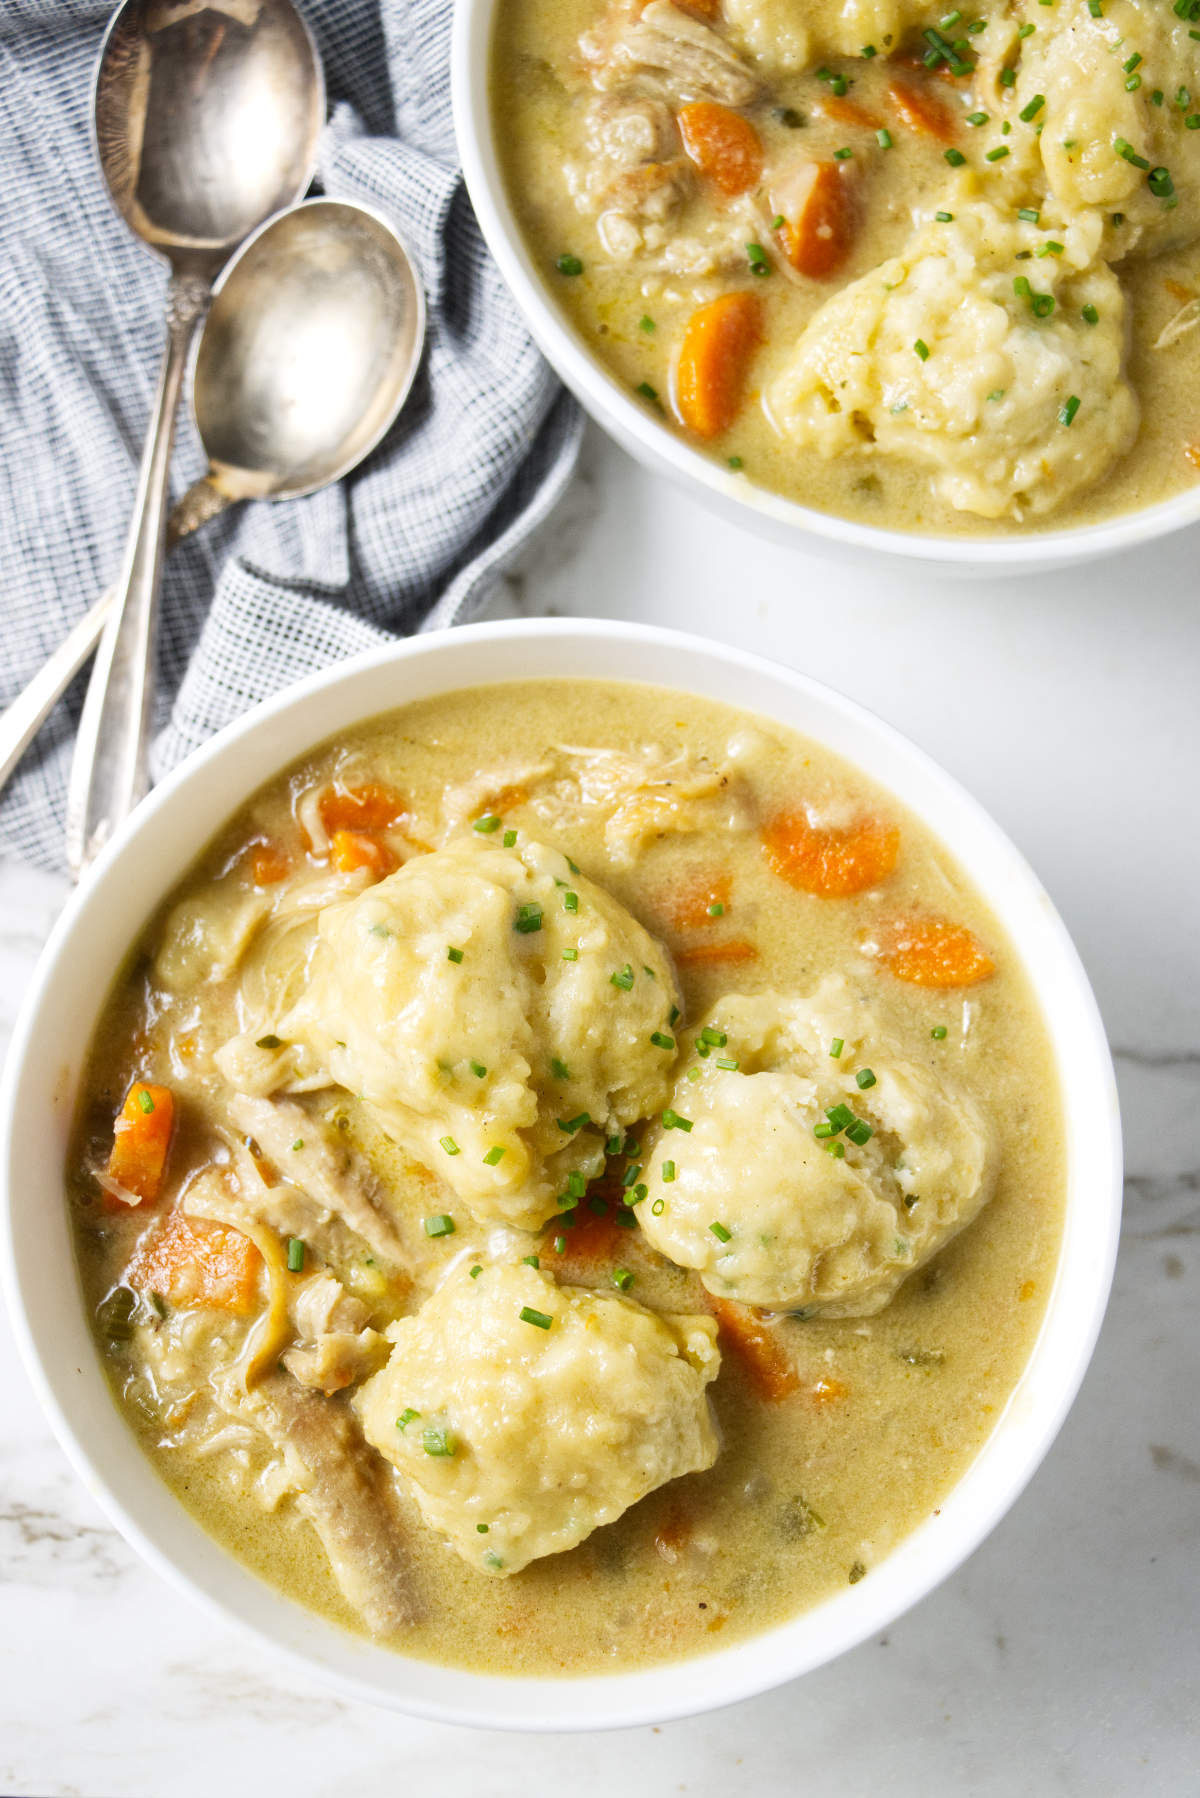 Three large dumplings in a bowl of creamy chicken soup.